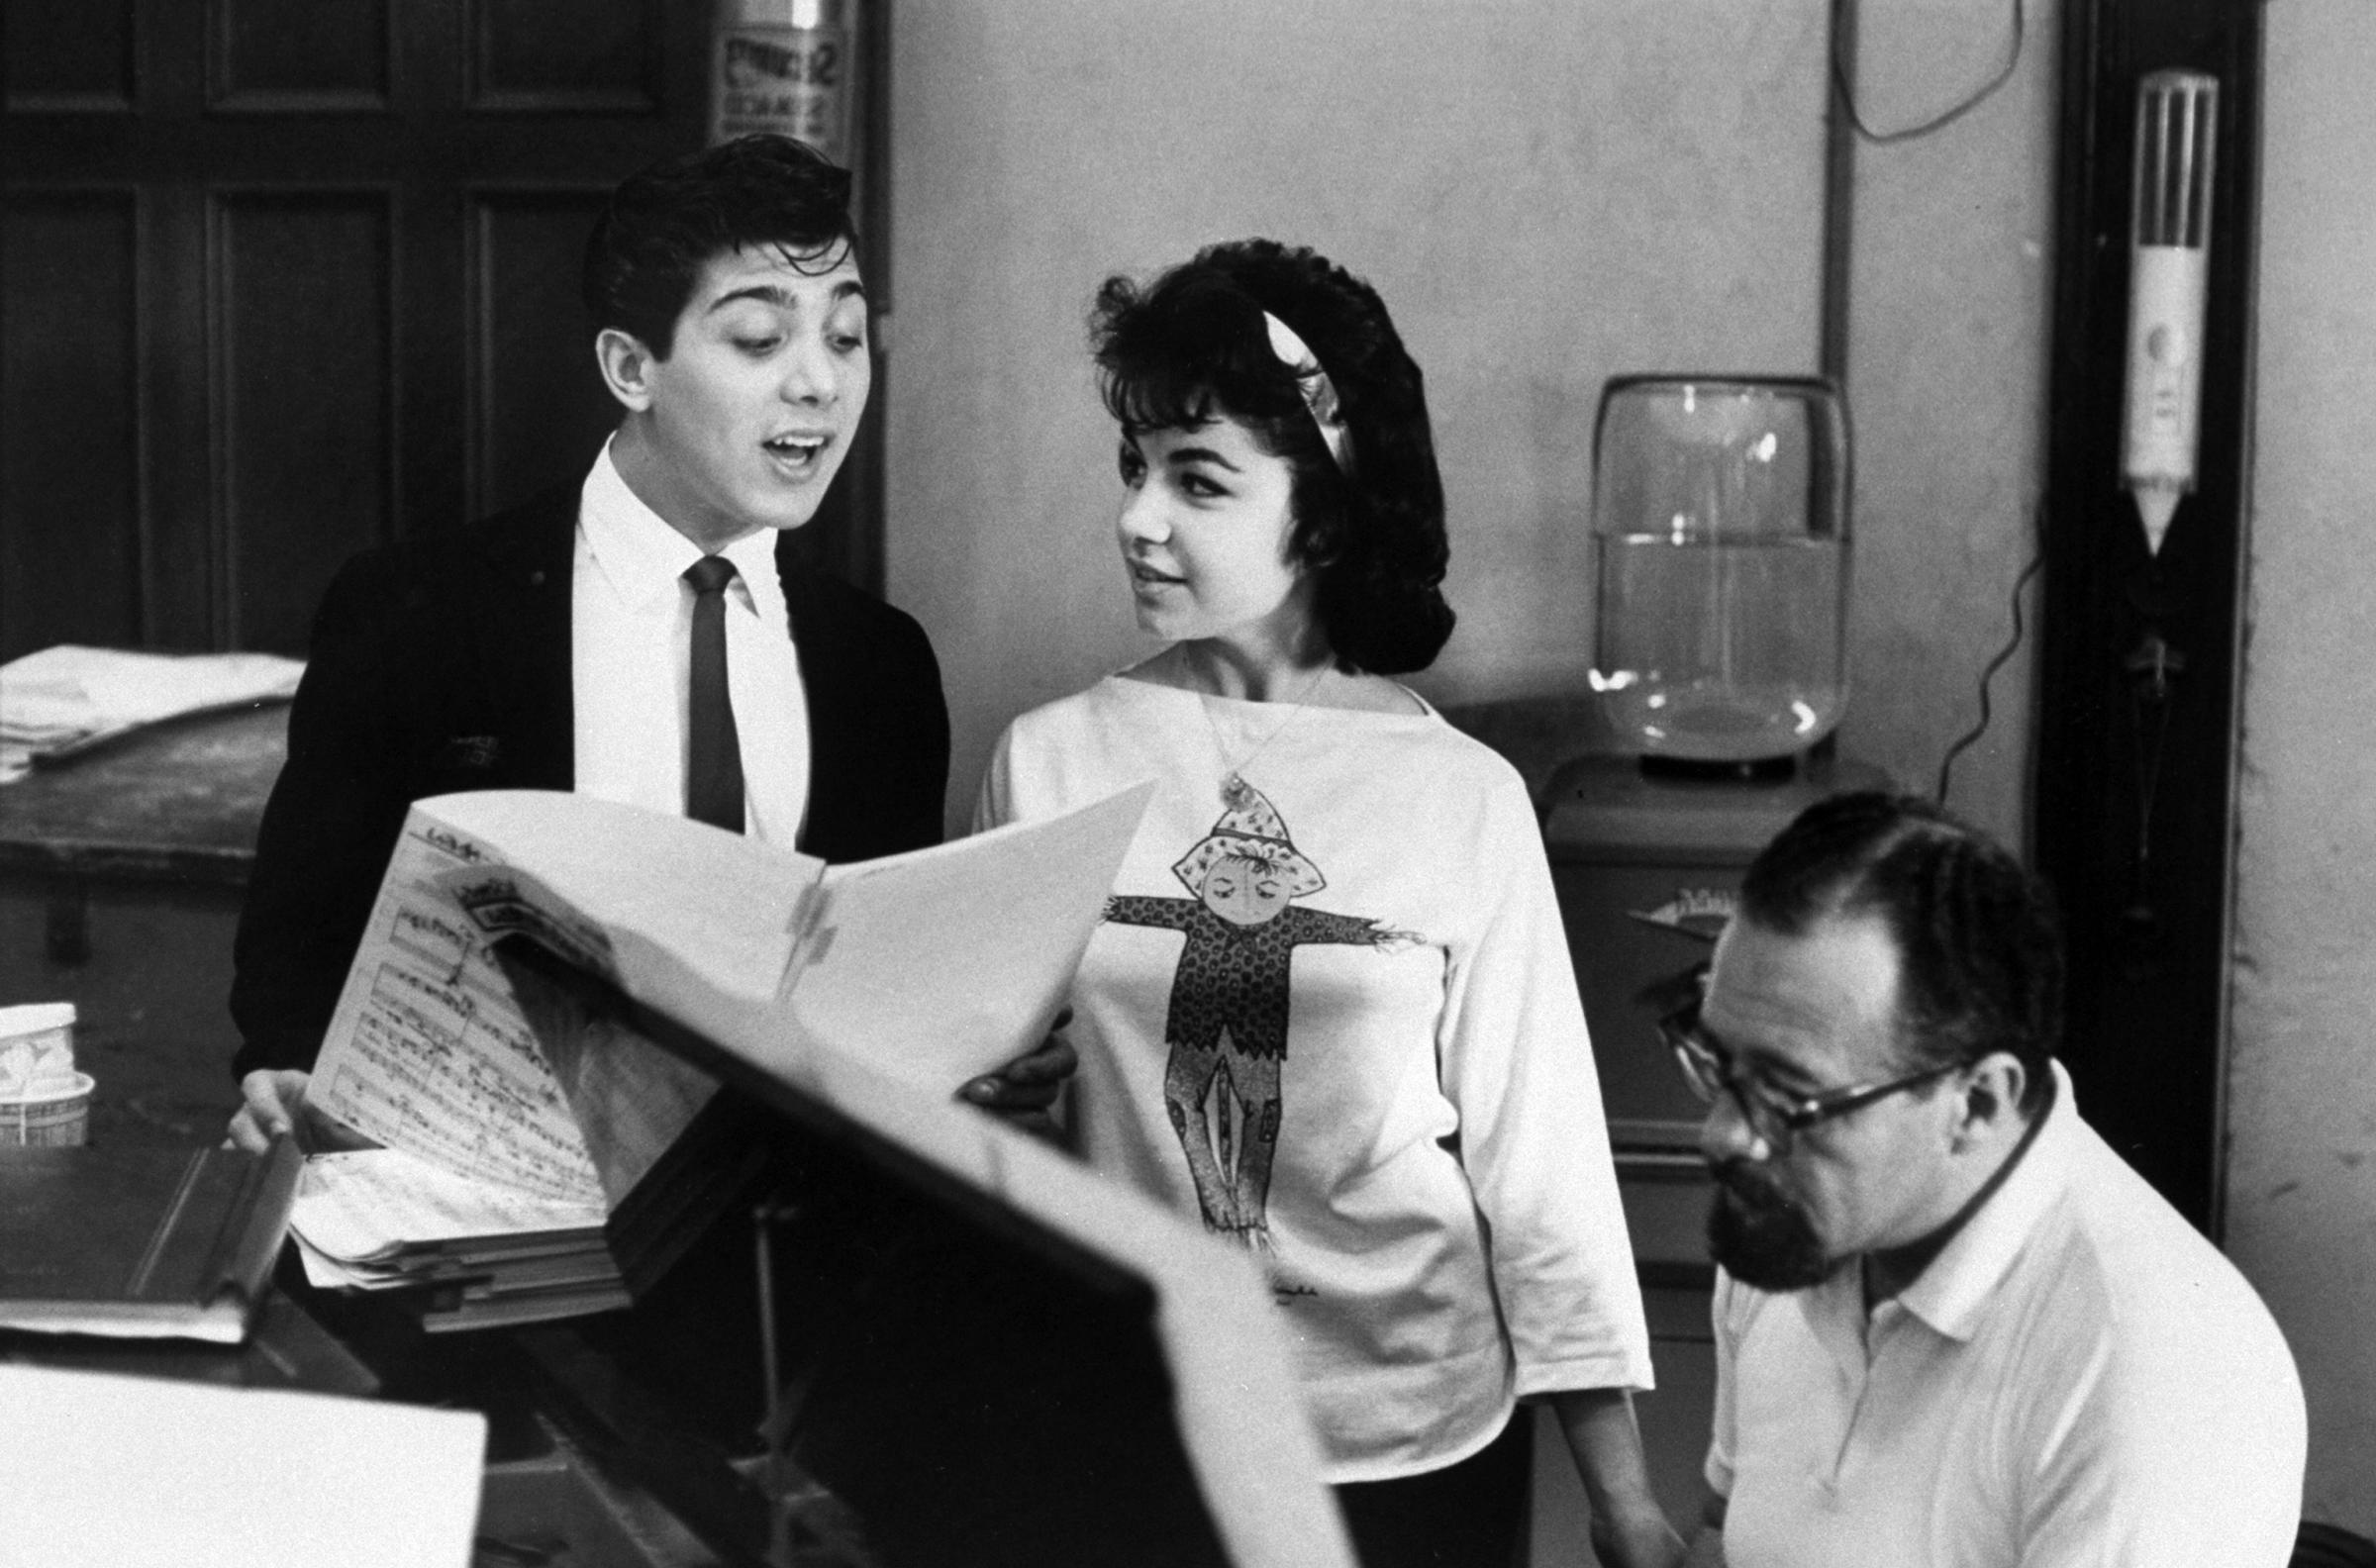 Paul Anka rehearsing with Annette Funicello, 1960.